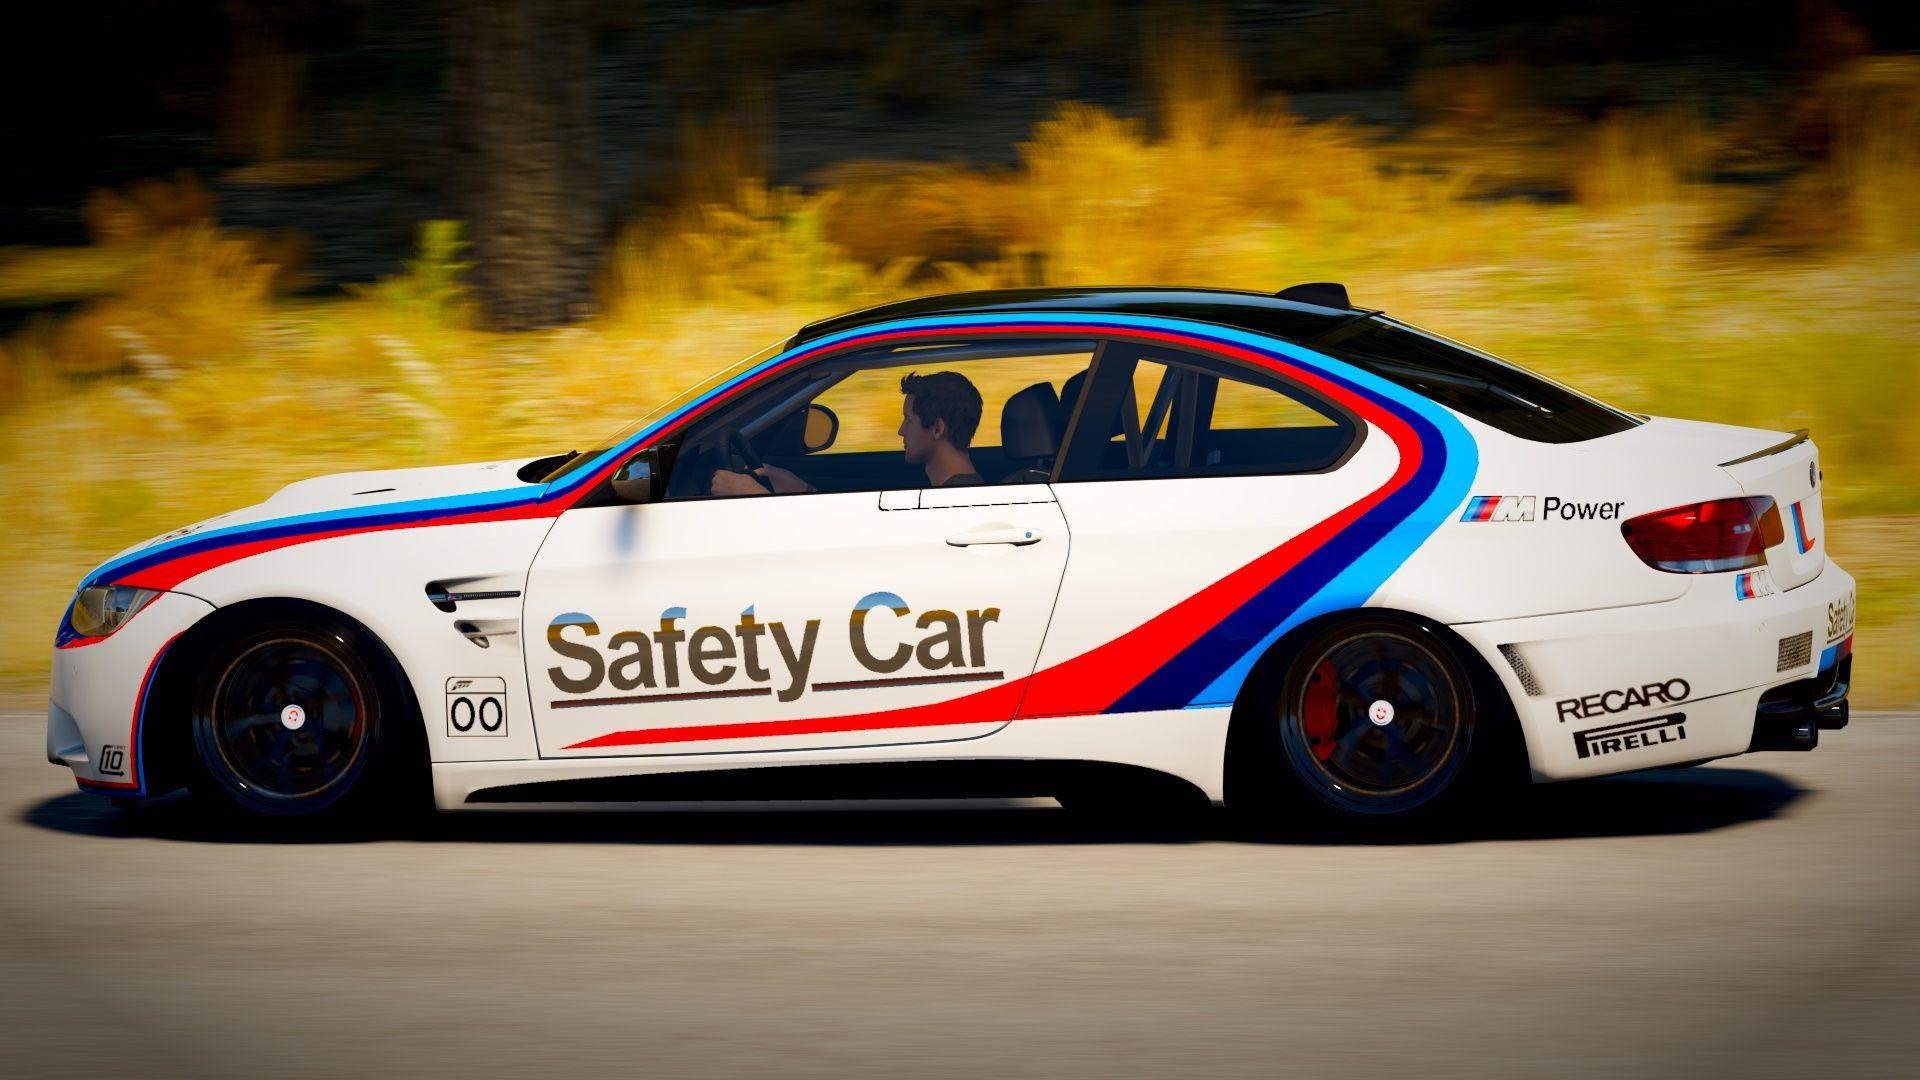 BMW M3 Racing Logo - Question regarding making logos. (Not a request) - Race Paint Booth ...